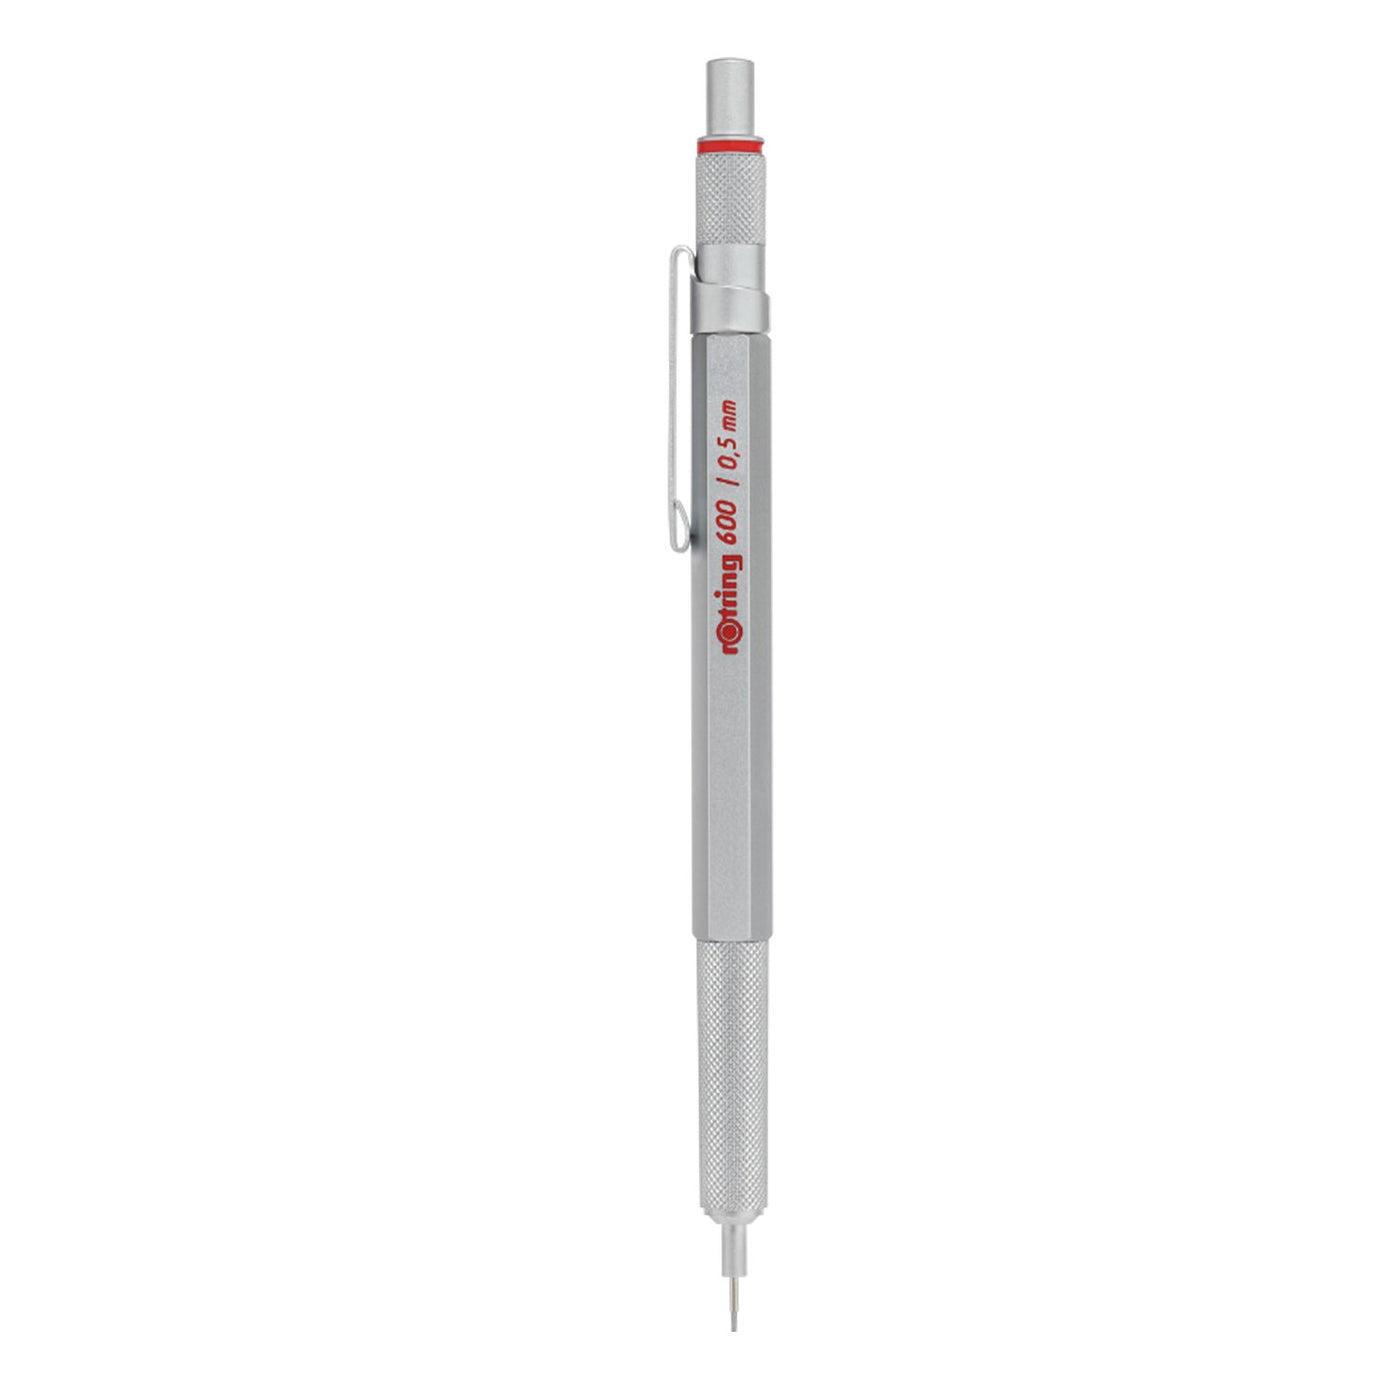 Rotring 600 0.5mm Mechanical Pencil - Silver 2